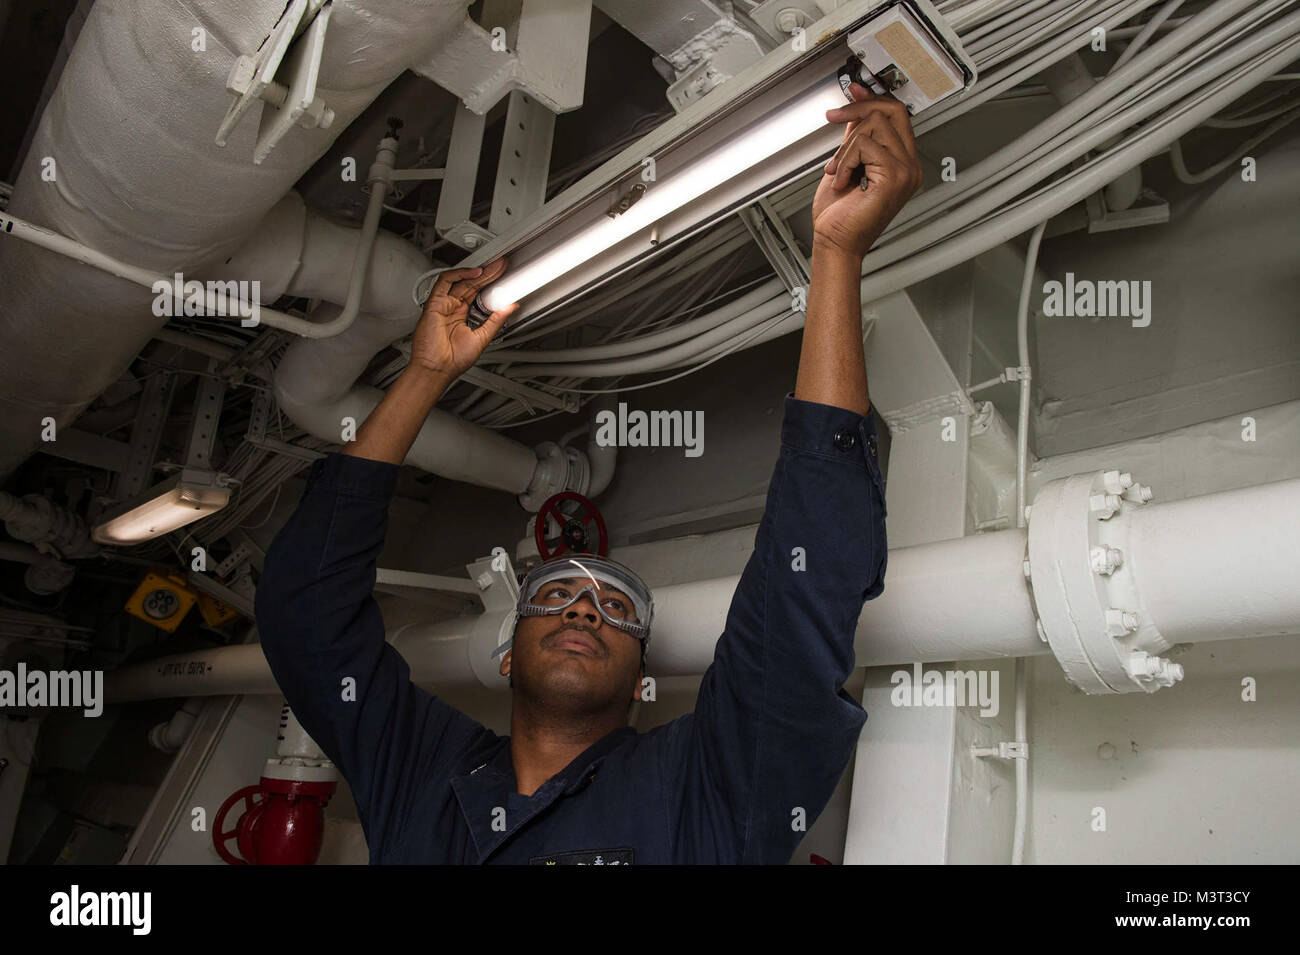 160406-N-MD297-004 PACIFIC OCEAN (April 6, 2016) - Operations Specialist 2nd Class Christopher Thomas replaces a fluorescent light bulb with a more energy efficient LED light bulb in a passageway aboard the Arleigh Burke-class guided-missile destroyer USS Lassen (DDG 82). Lassen is currently underway in support of Operation Martillo, a joint operation with the U.S. Coast Guard and partner nations within the 4th Fleet area of responsibility. Operation Martillo is being led by Joint Interagency Task Force South, in support of U.S. Southern Command. (U.S. Navy photo by Mass Communication Speciali Stock Photo